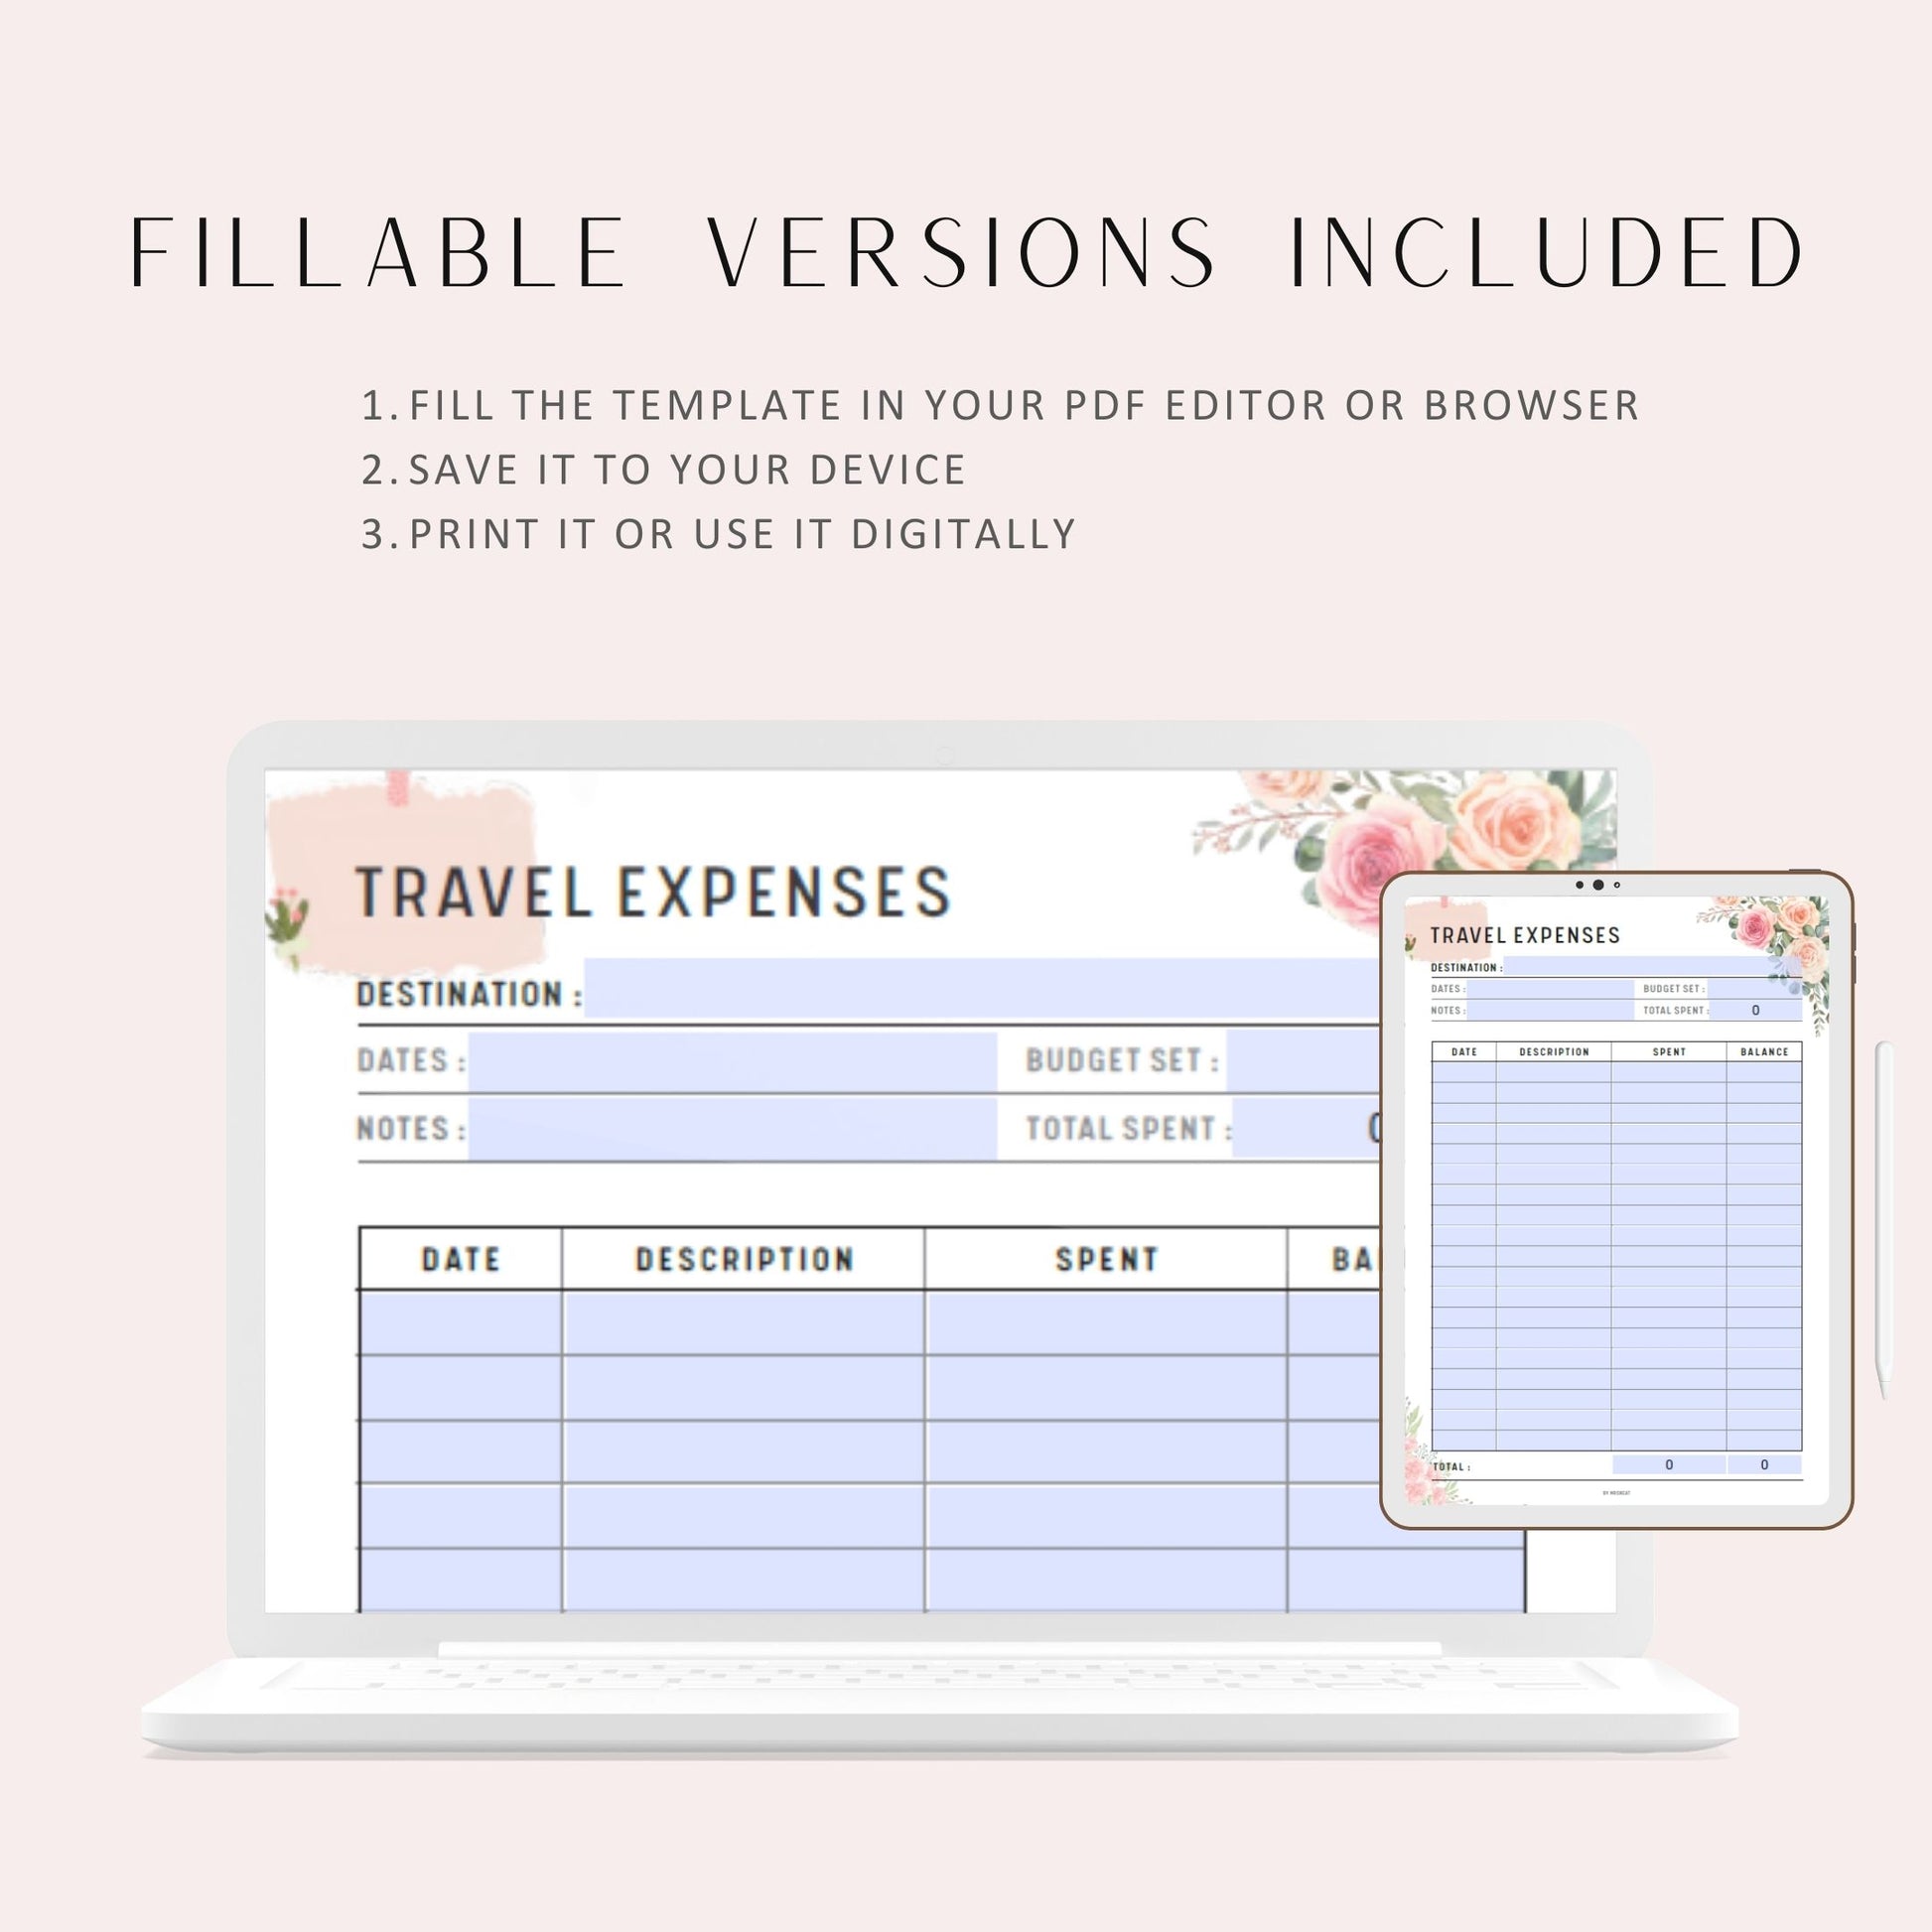 Floral Travel Expenses Tracker Template Printable, A4, A5, Letter, Half Letter, Fillable version included